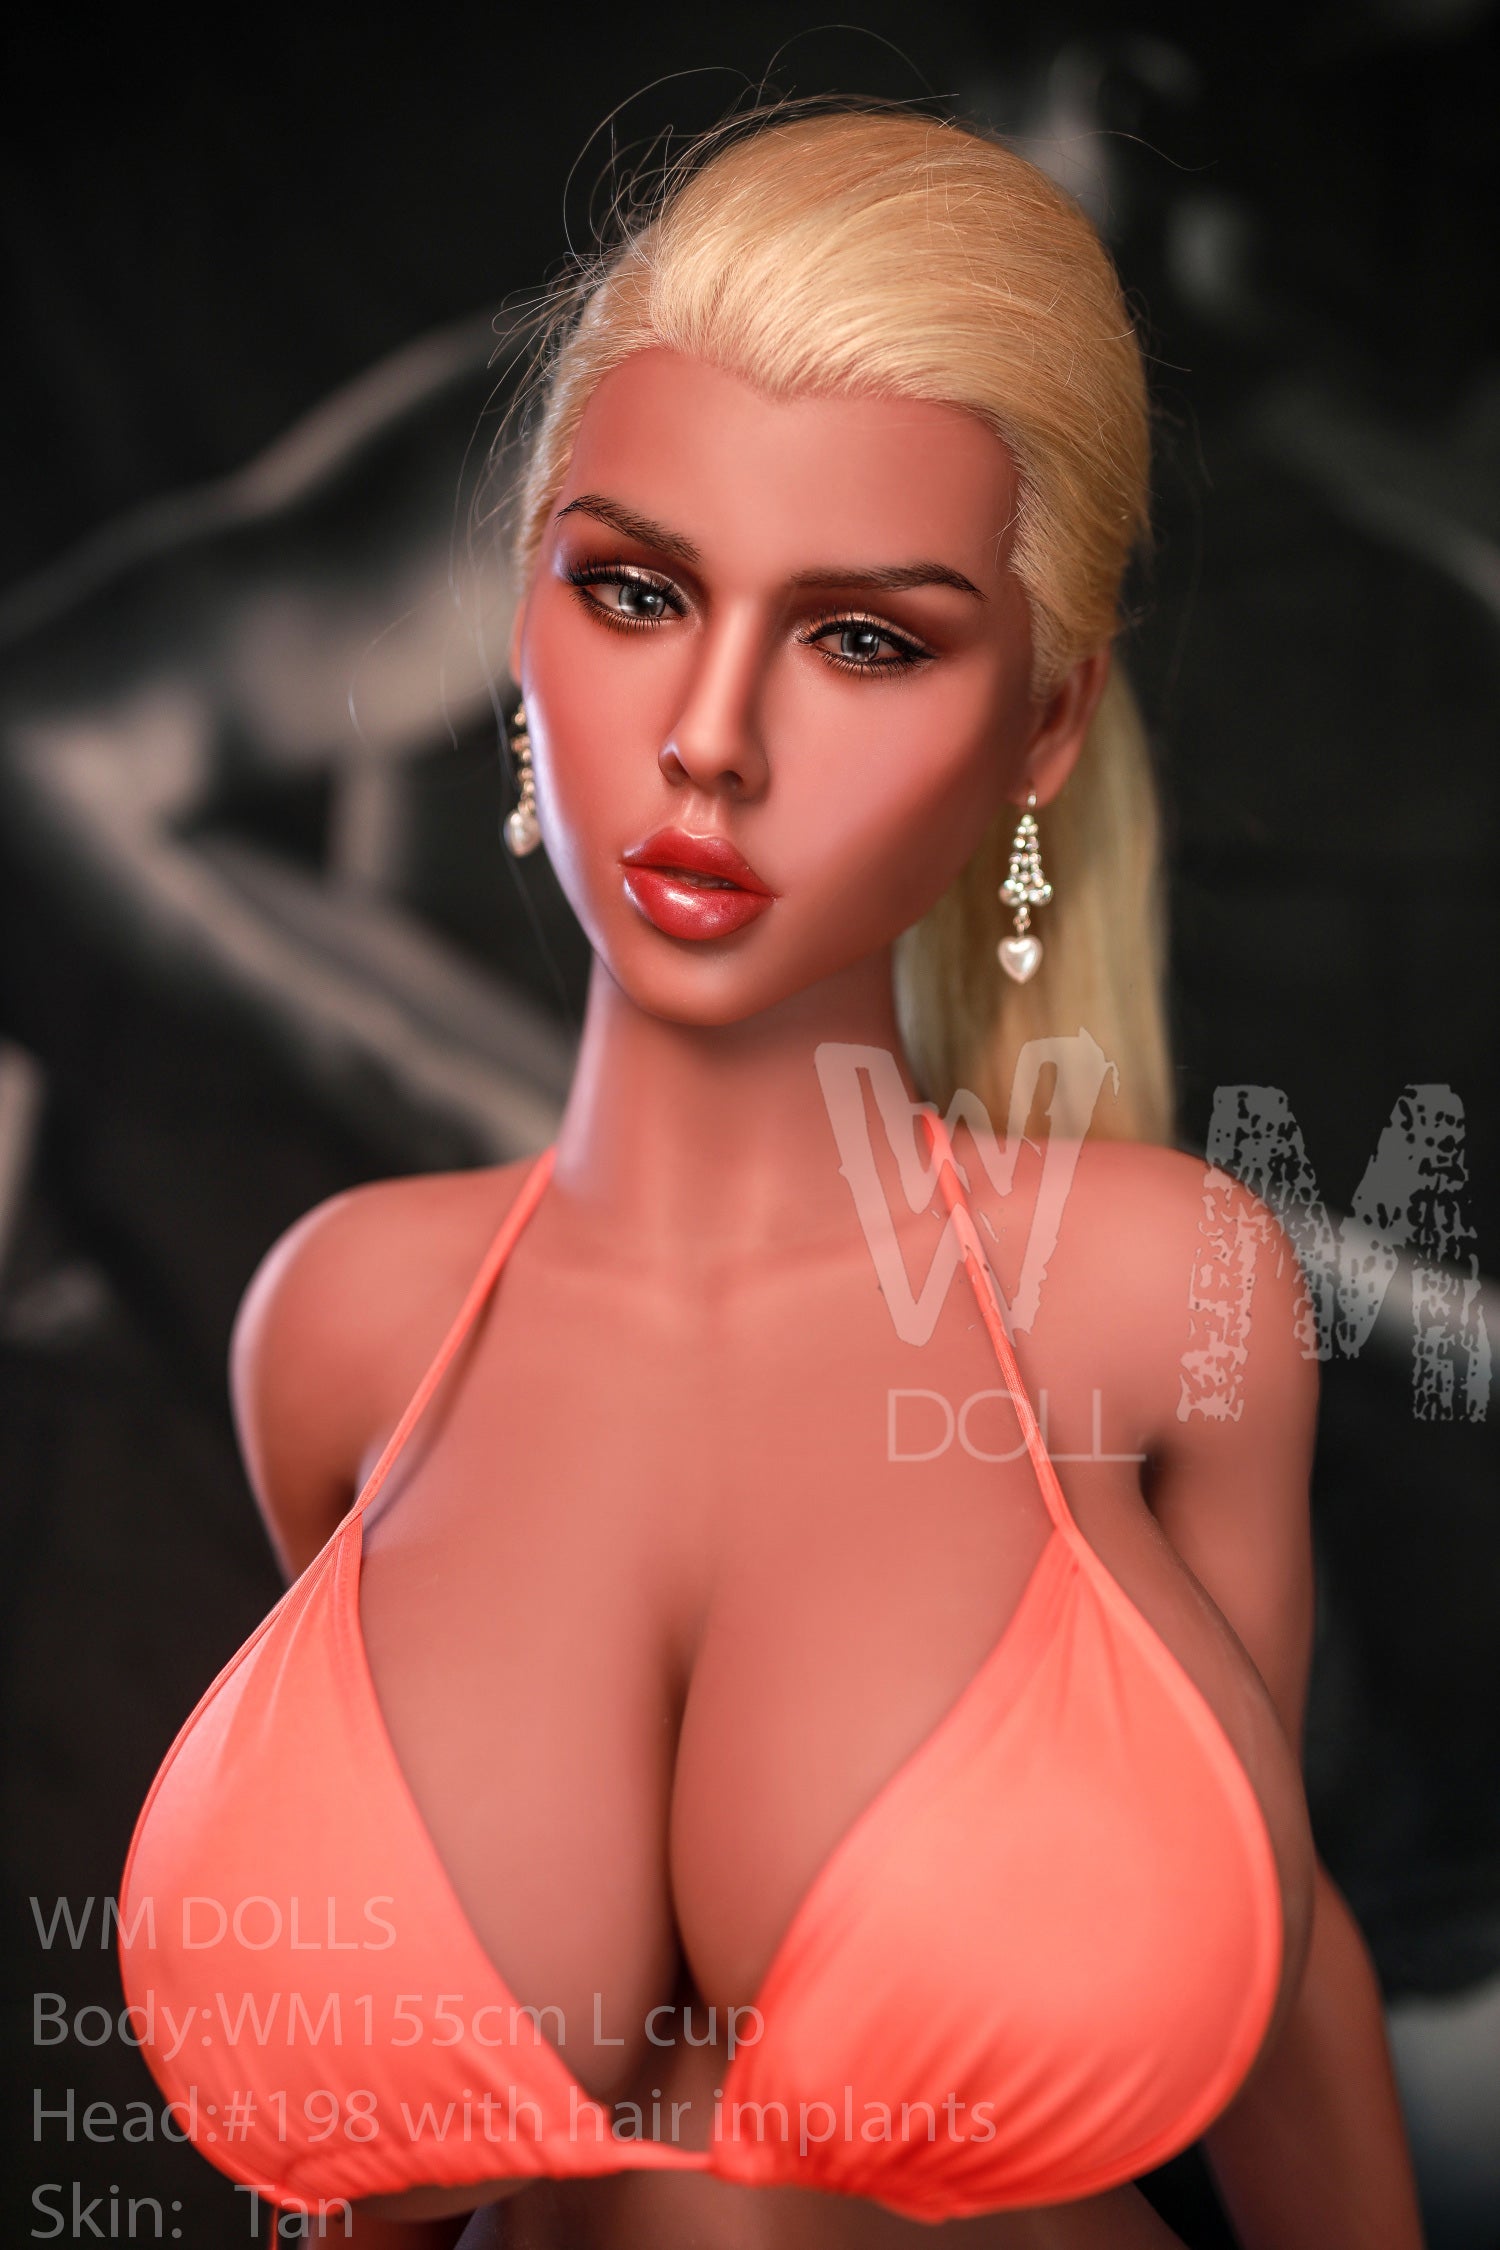 WMDOLL 155cm L with Hair Implants No.198